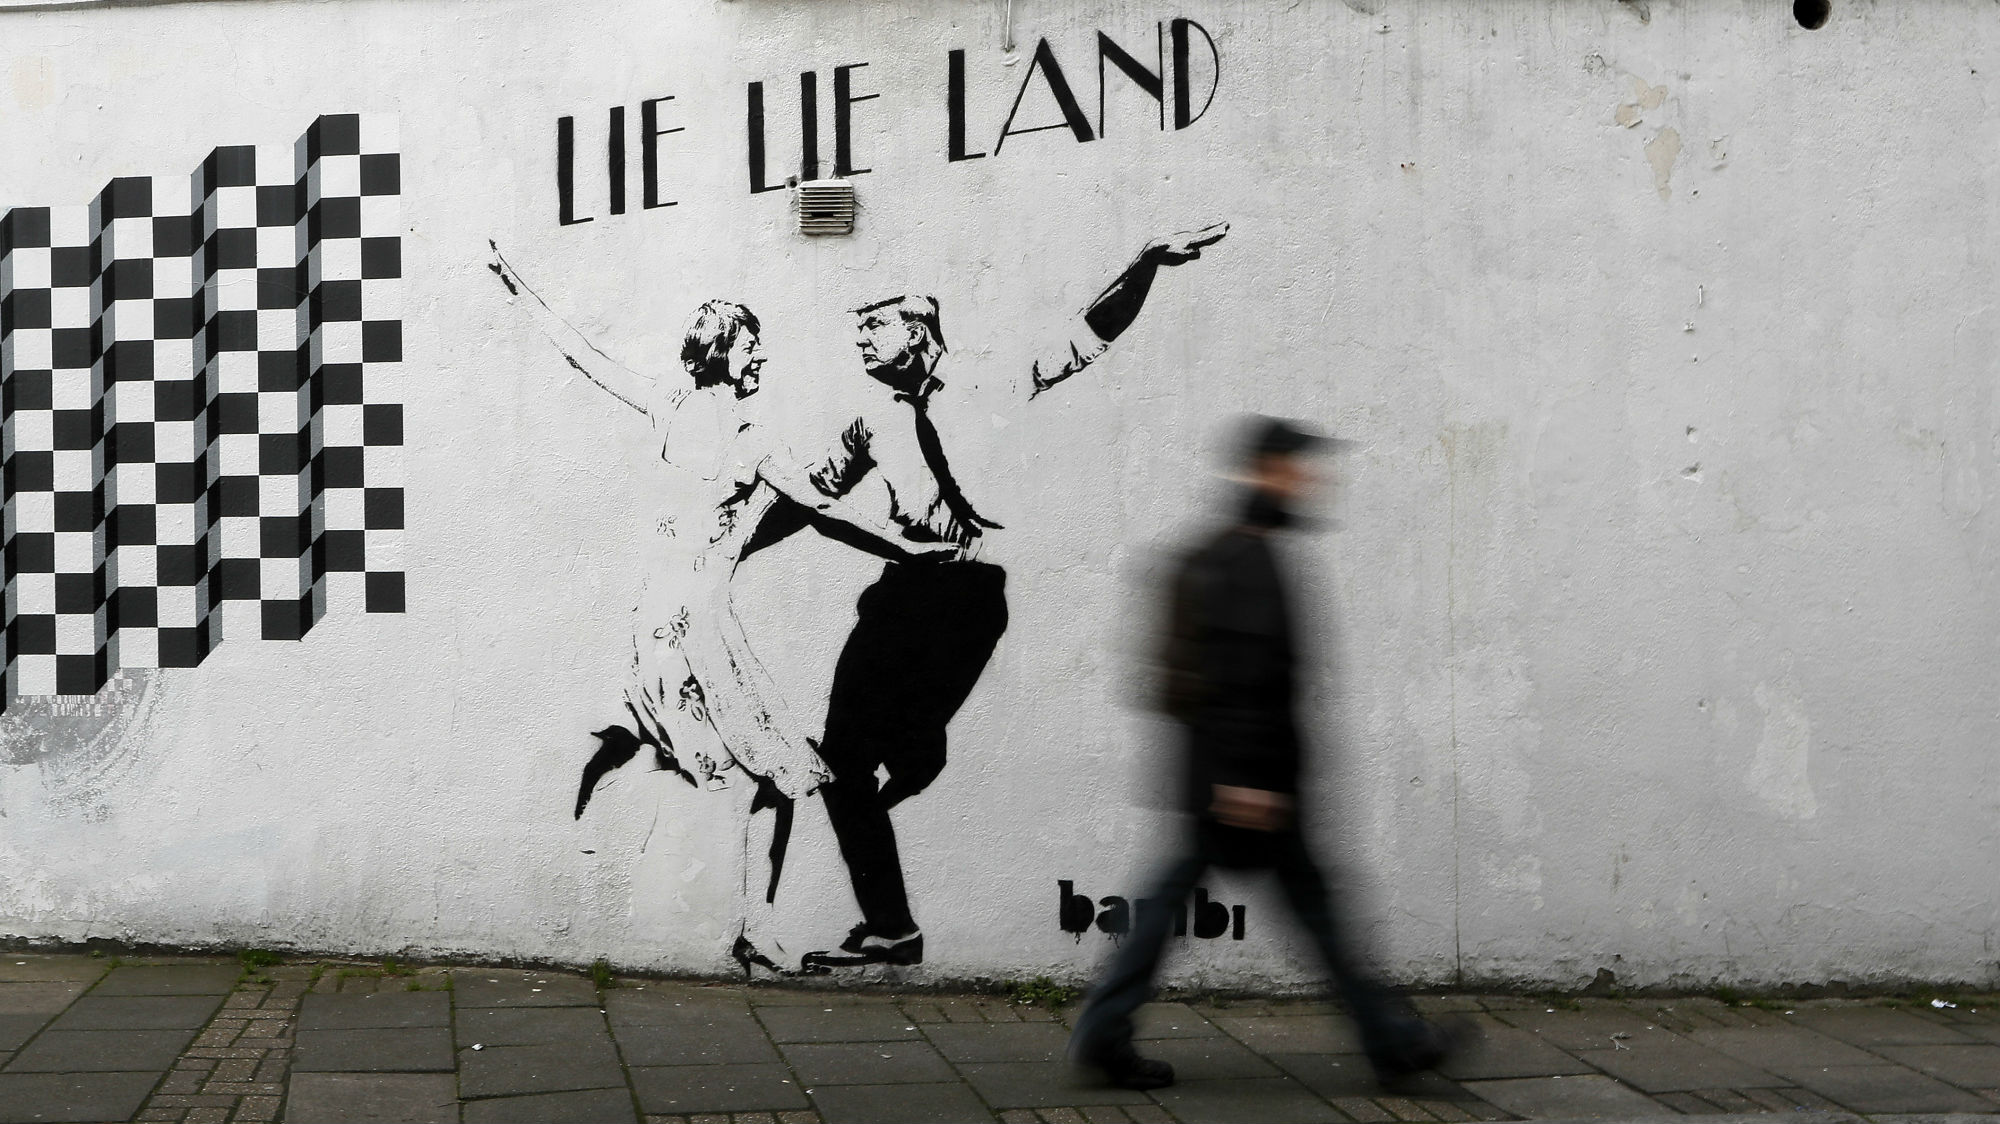 Street artist Bambi depicts and Donald Trump dancing in a La La Land-inspired mural in London